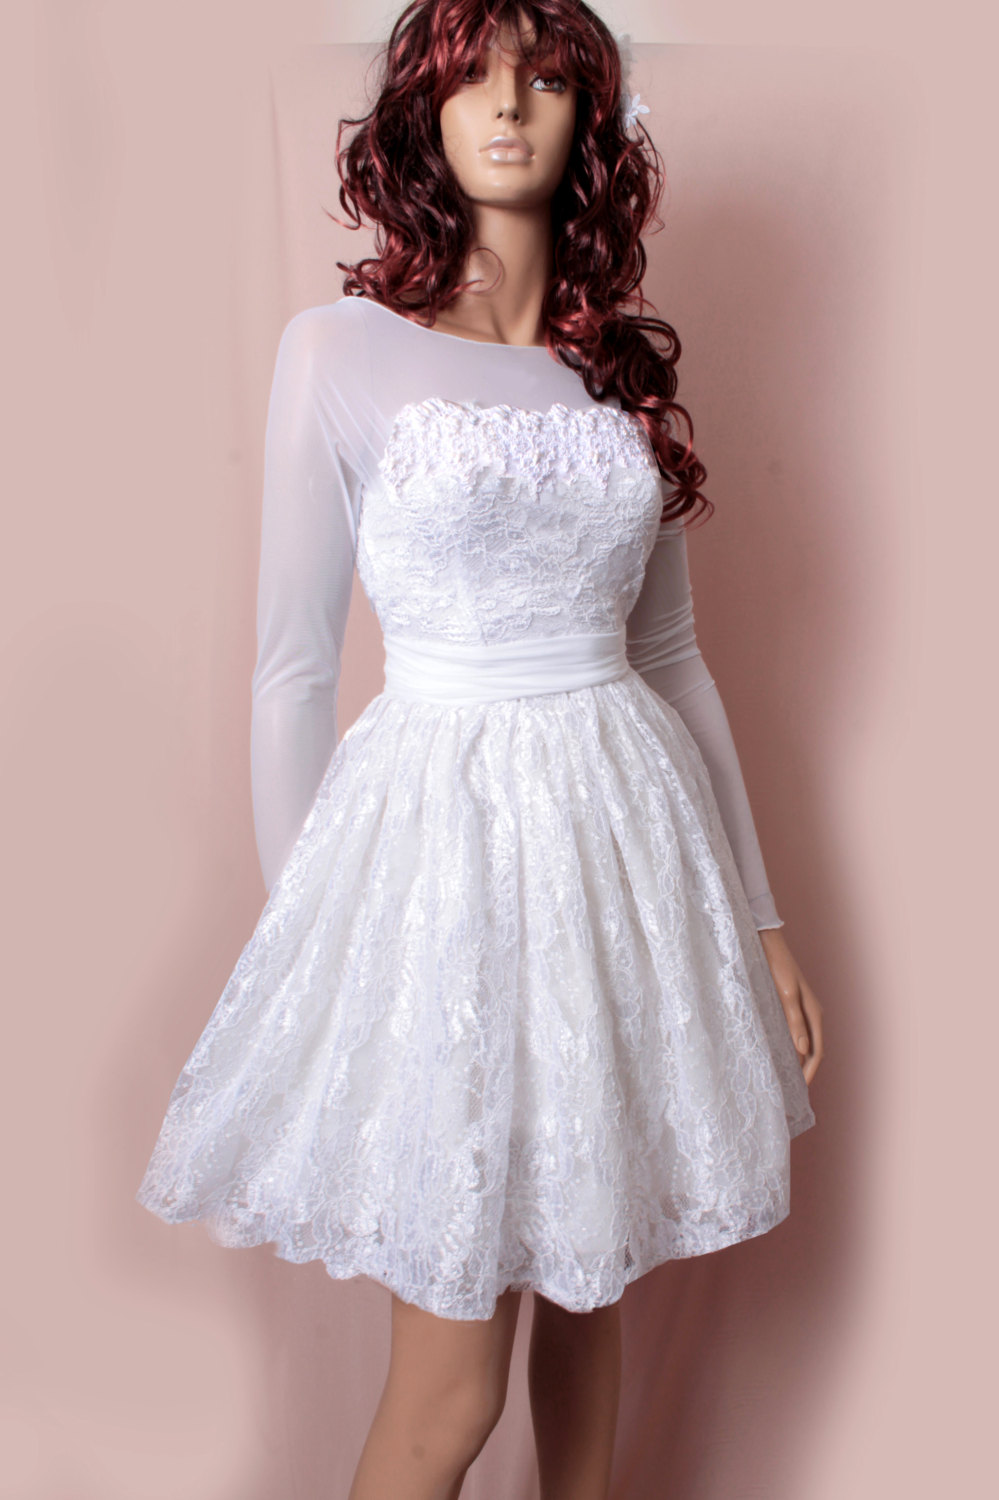 Short wedding lace dresses / long Sleeves tulle / Custom Made/ Bridal Gown